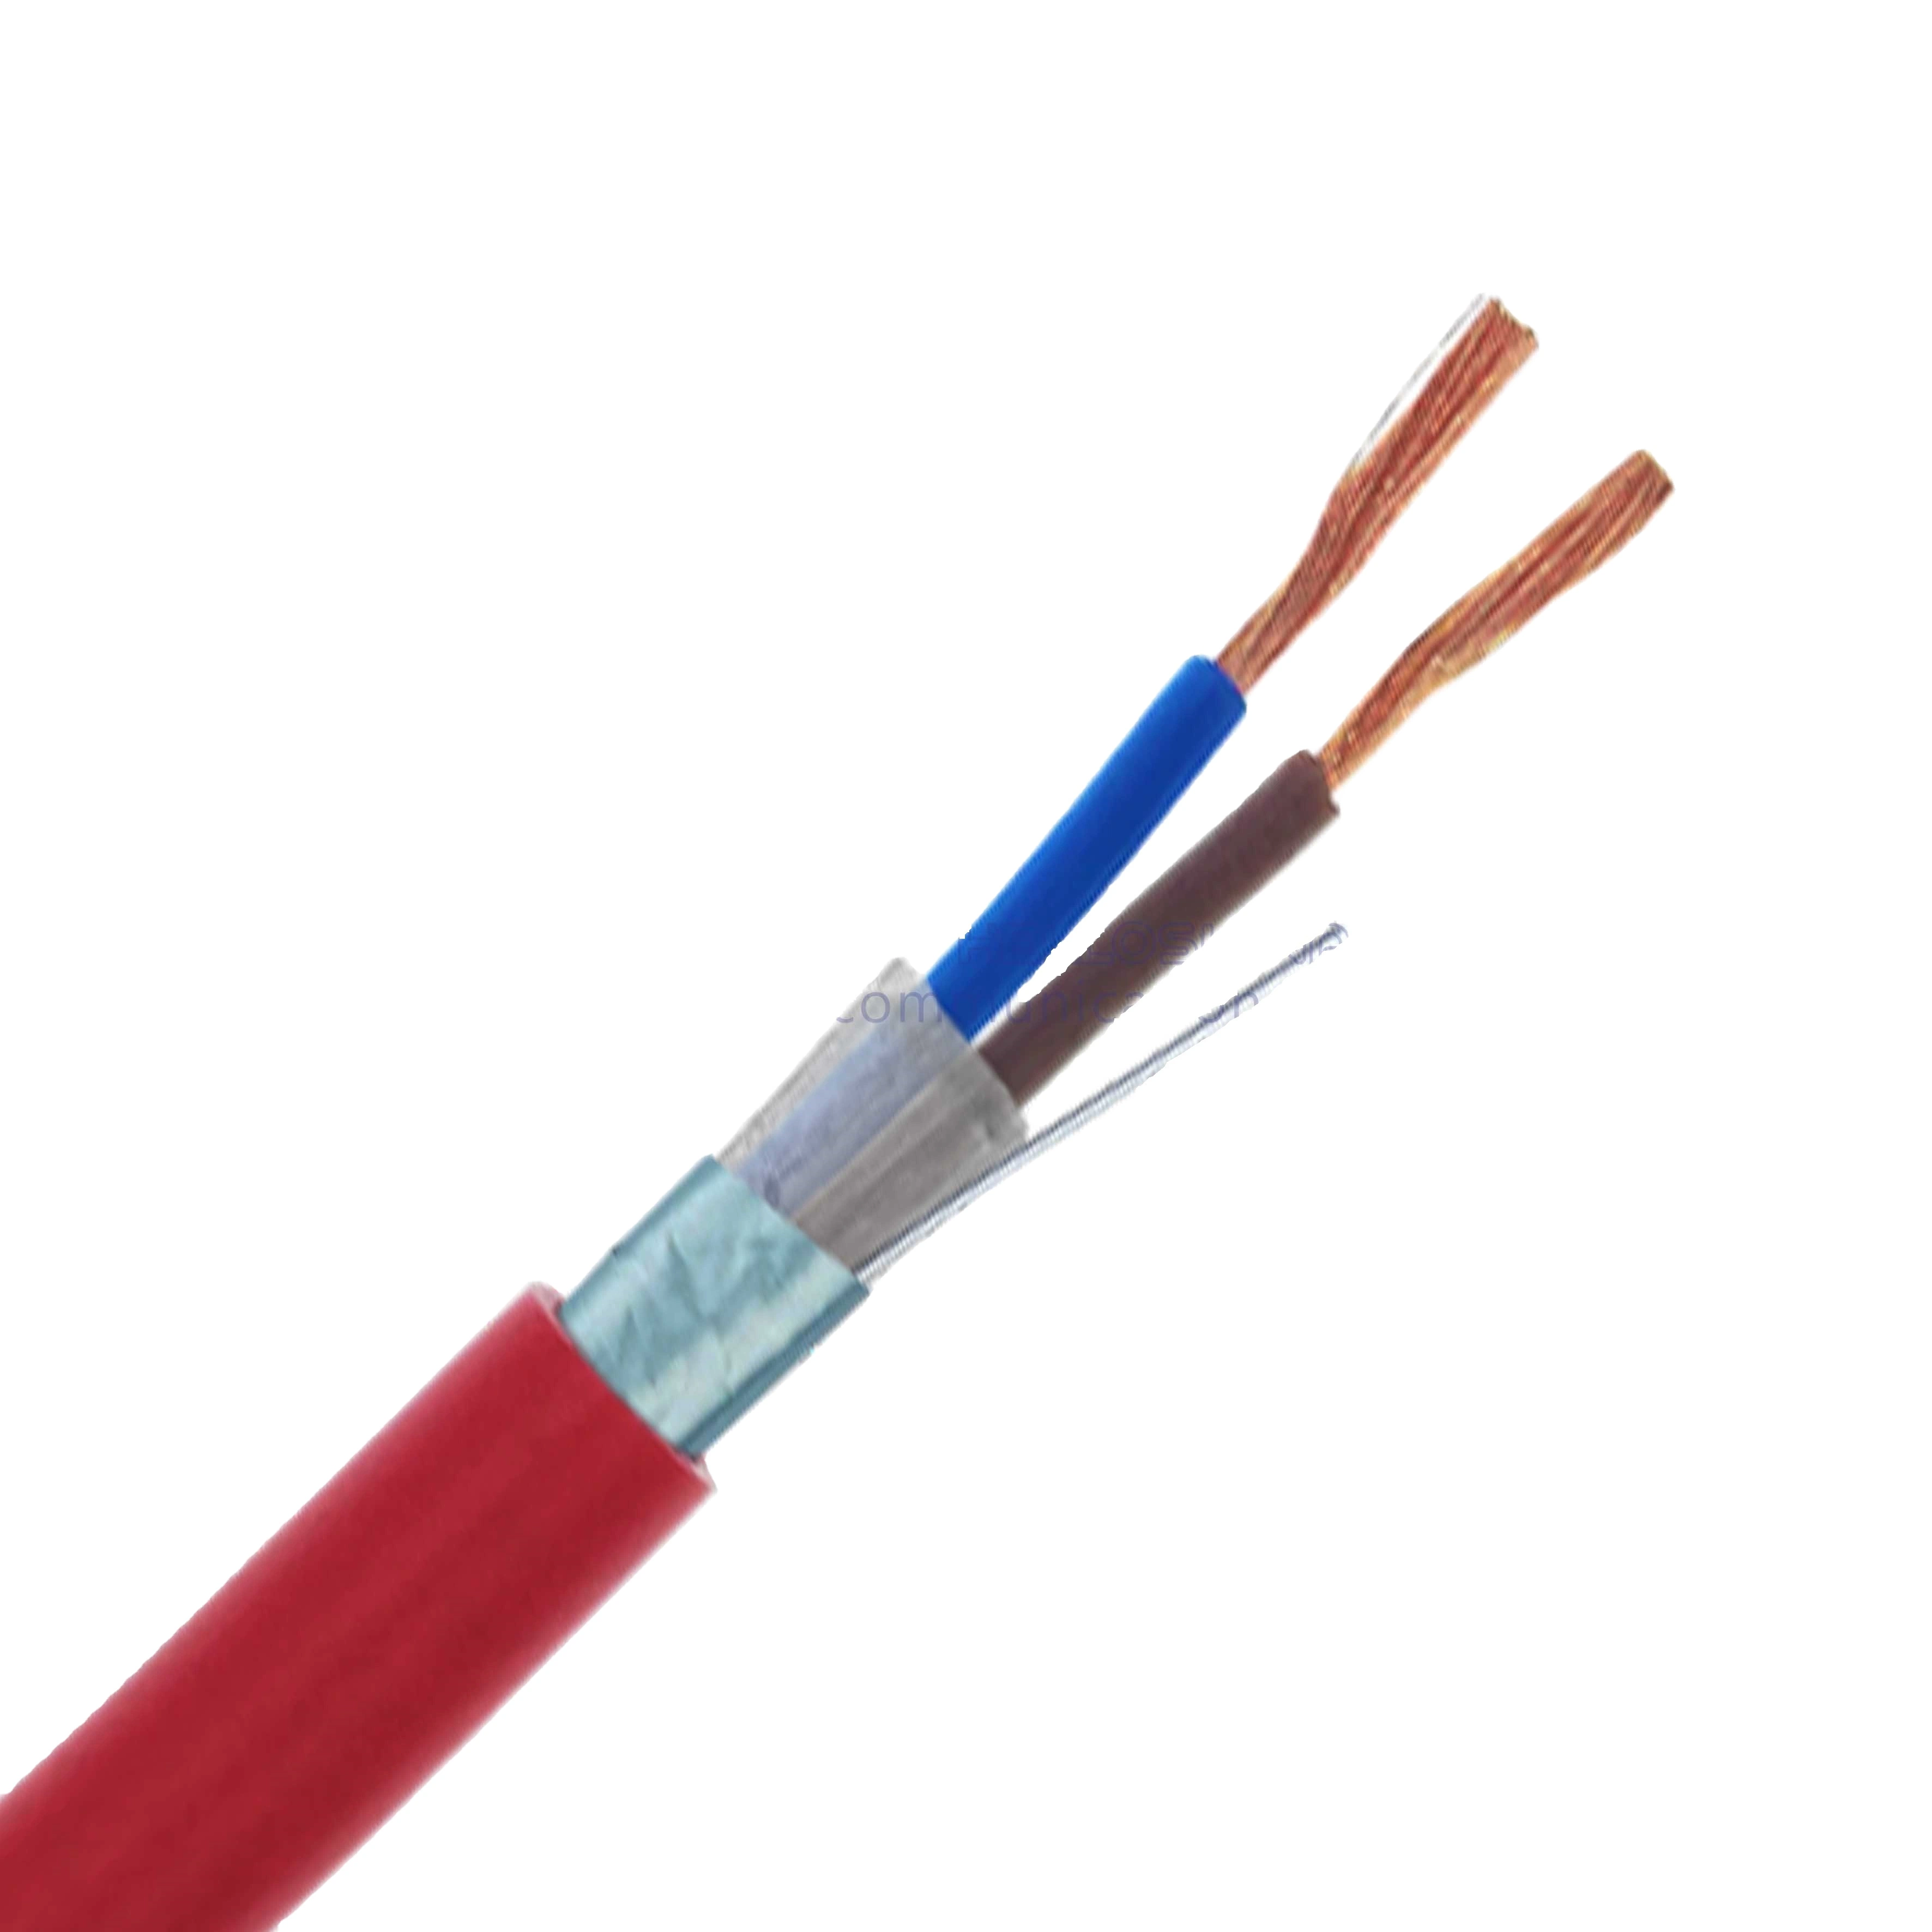 UL Listed Shielded 3 Core 2.5mm Fire Alarm Flame Retardant Cable for Fire Alarm Systems Fire Alarm Control Shielded 4 Cores Solid Strand Conductor Alarm Cable